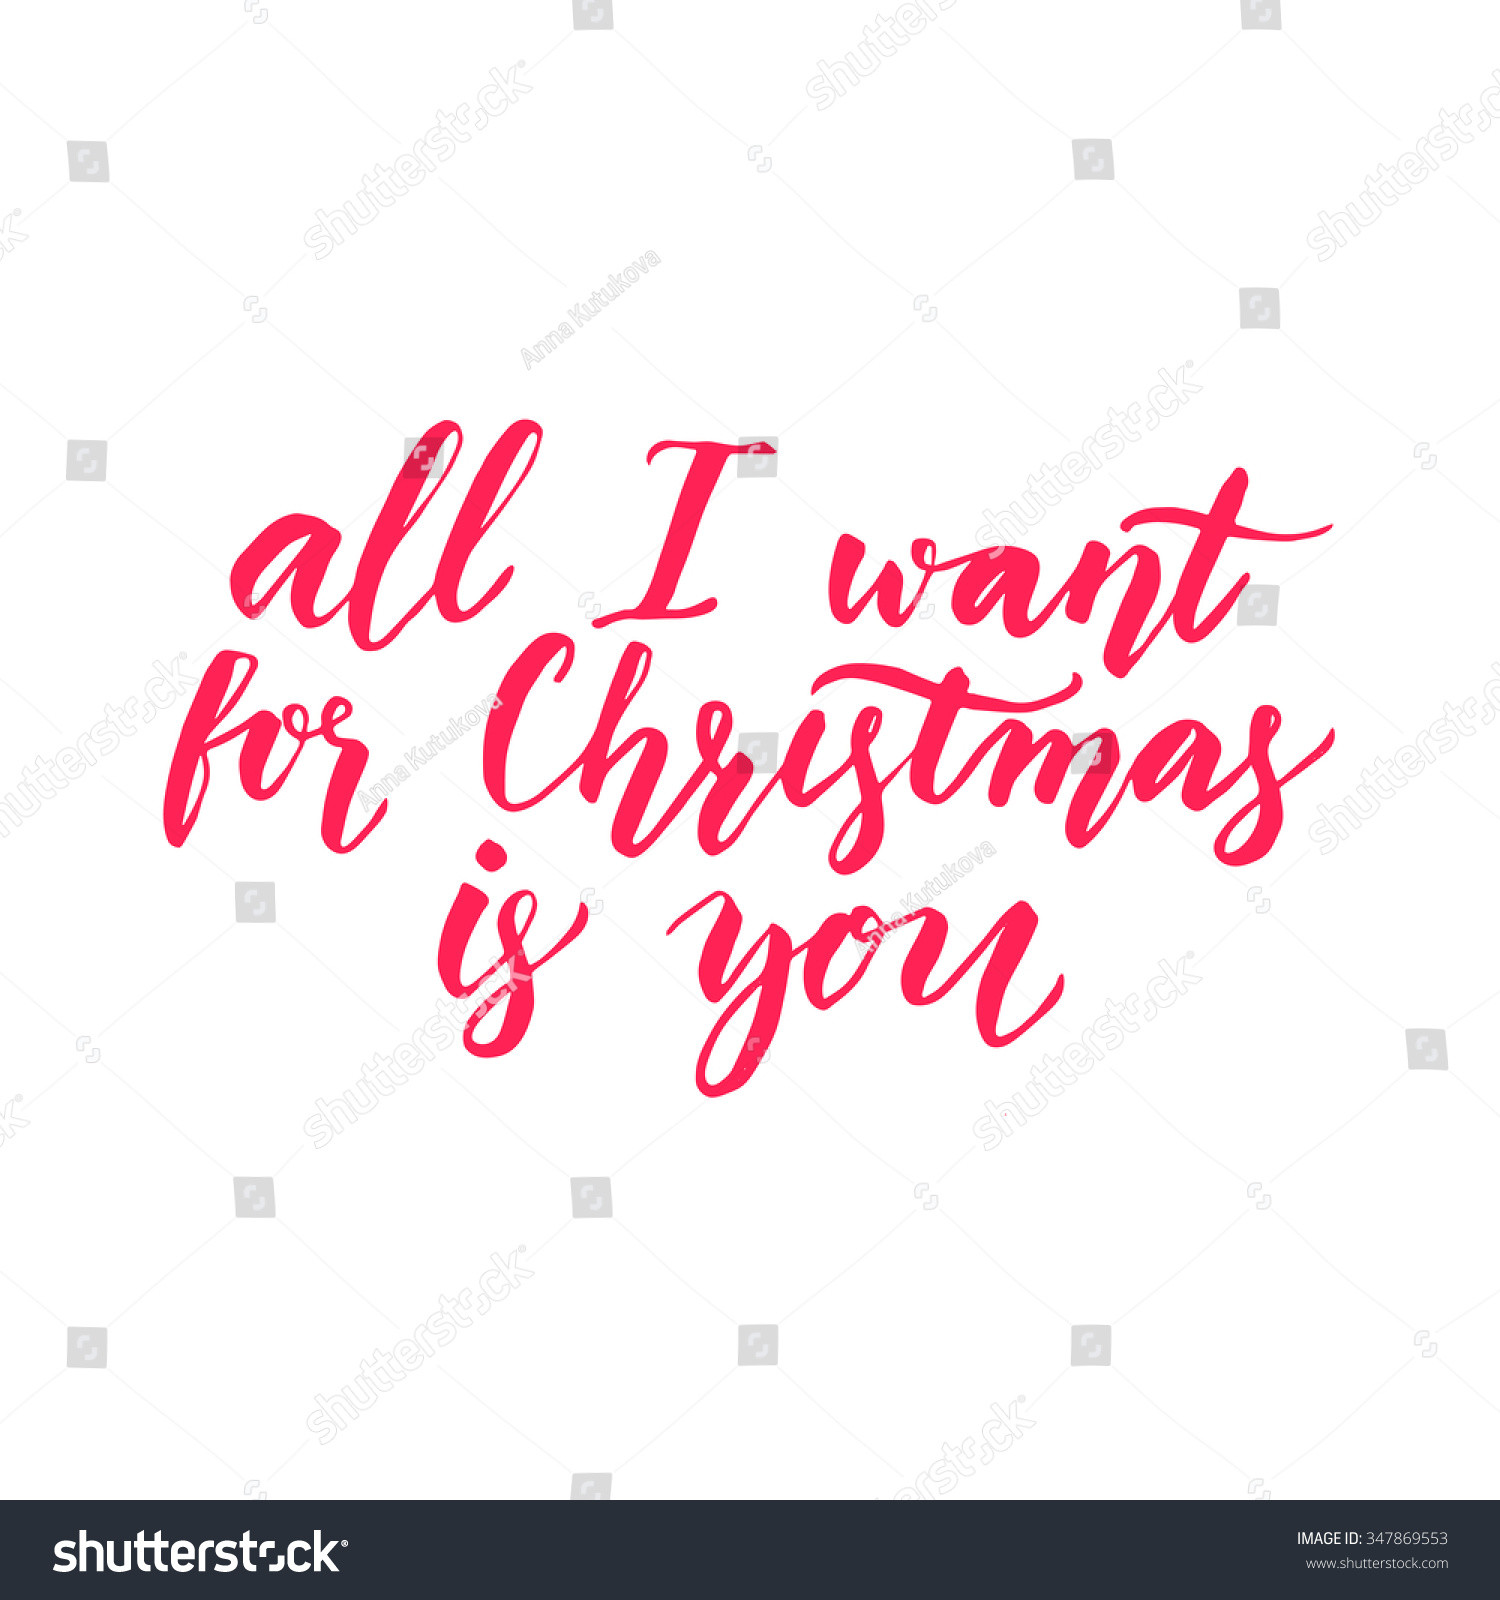 All I Want For Christmas Is You Quotes
 All Want Christmas You Inspirational Quote Stock Vector